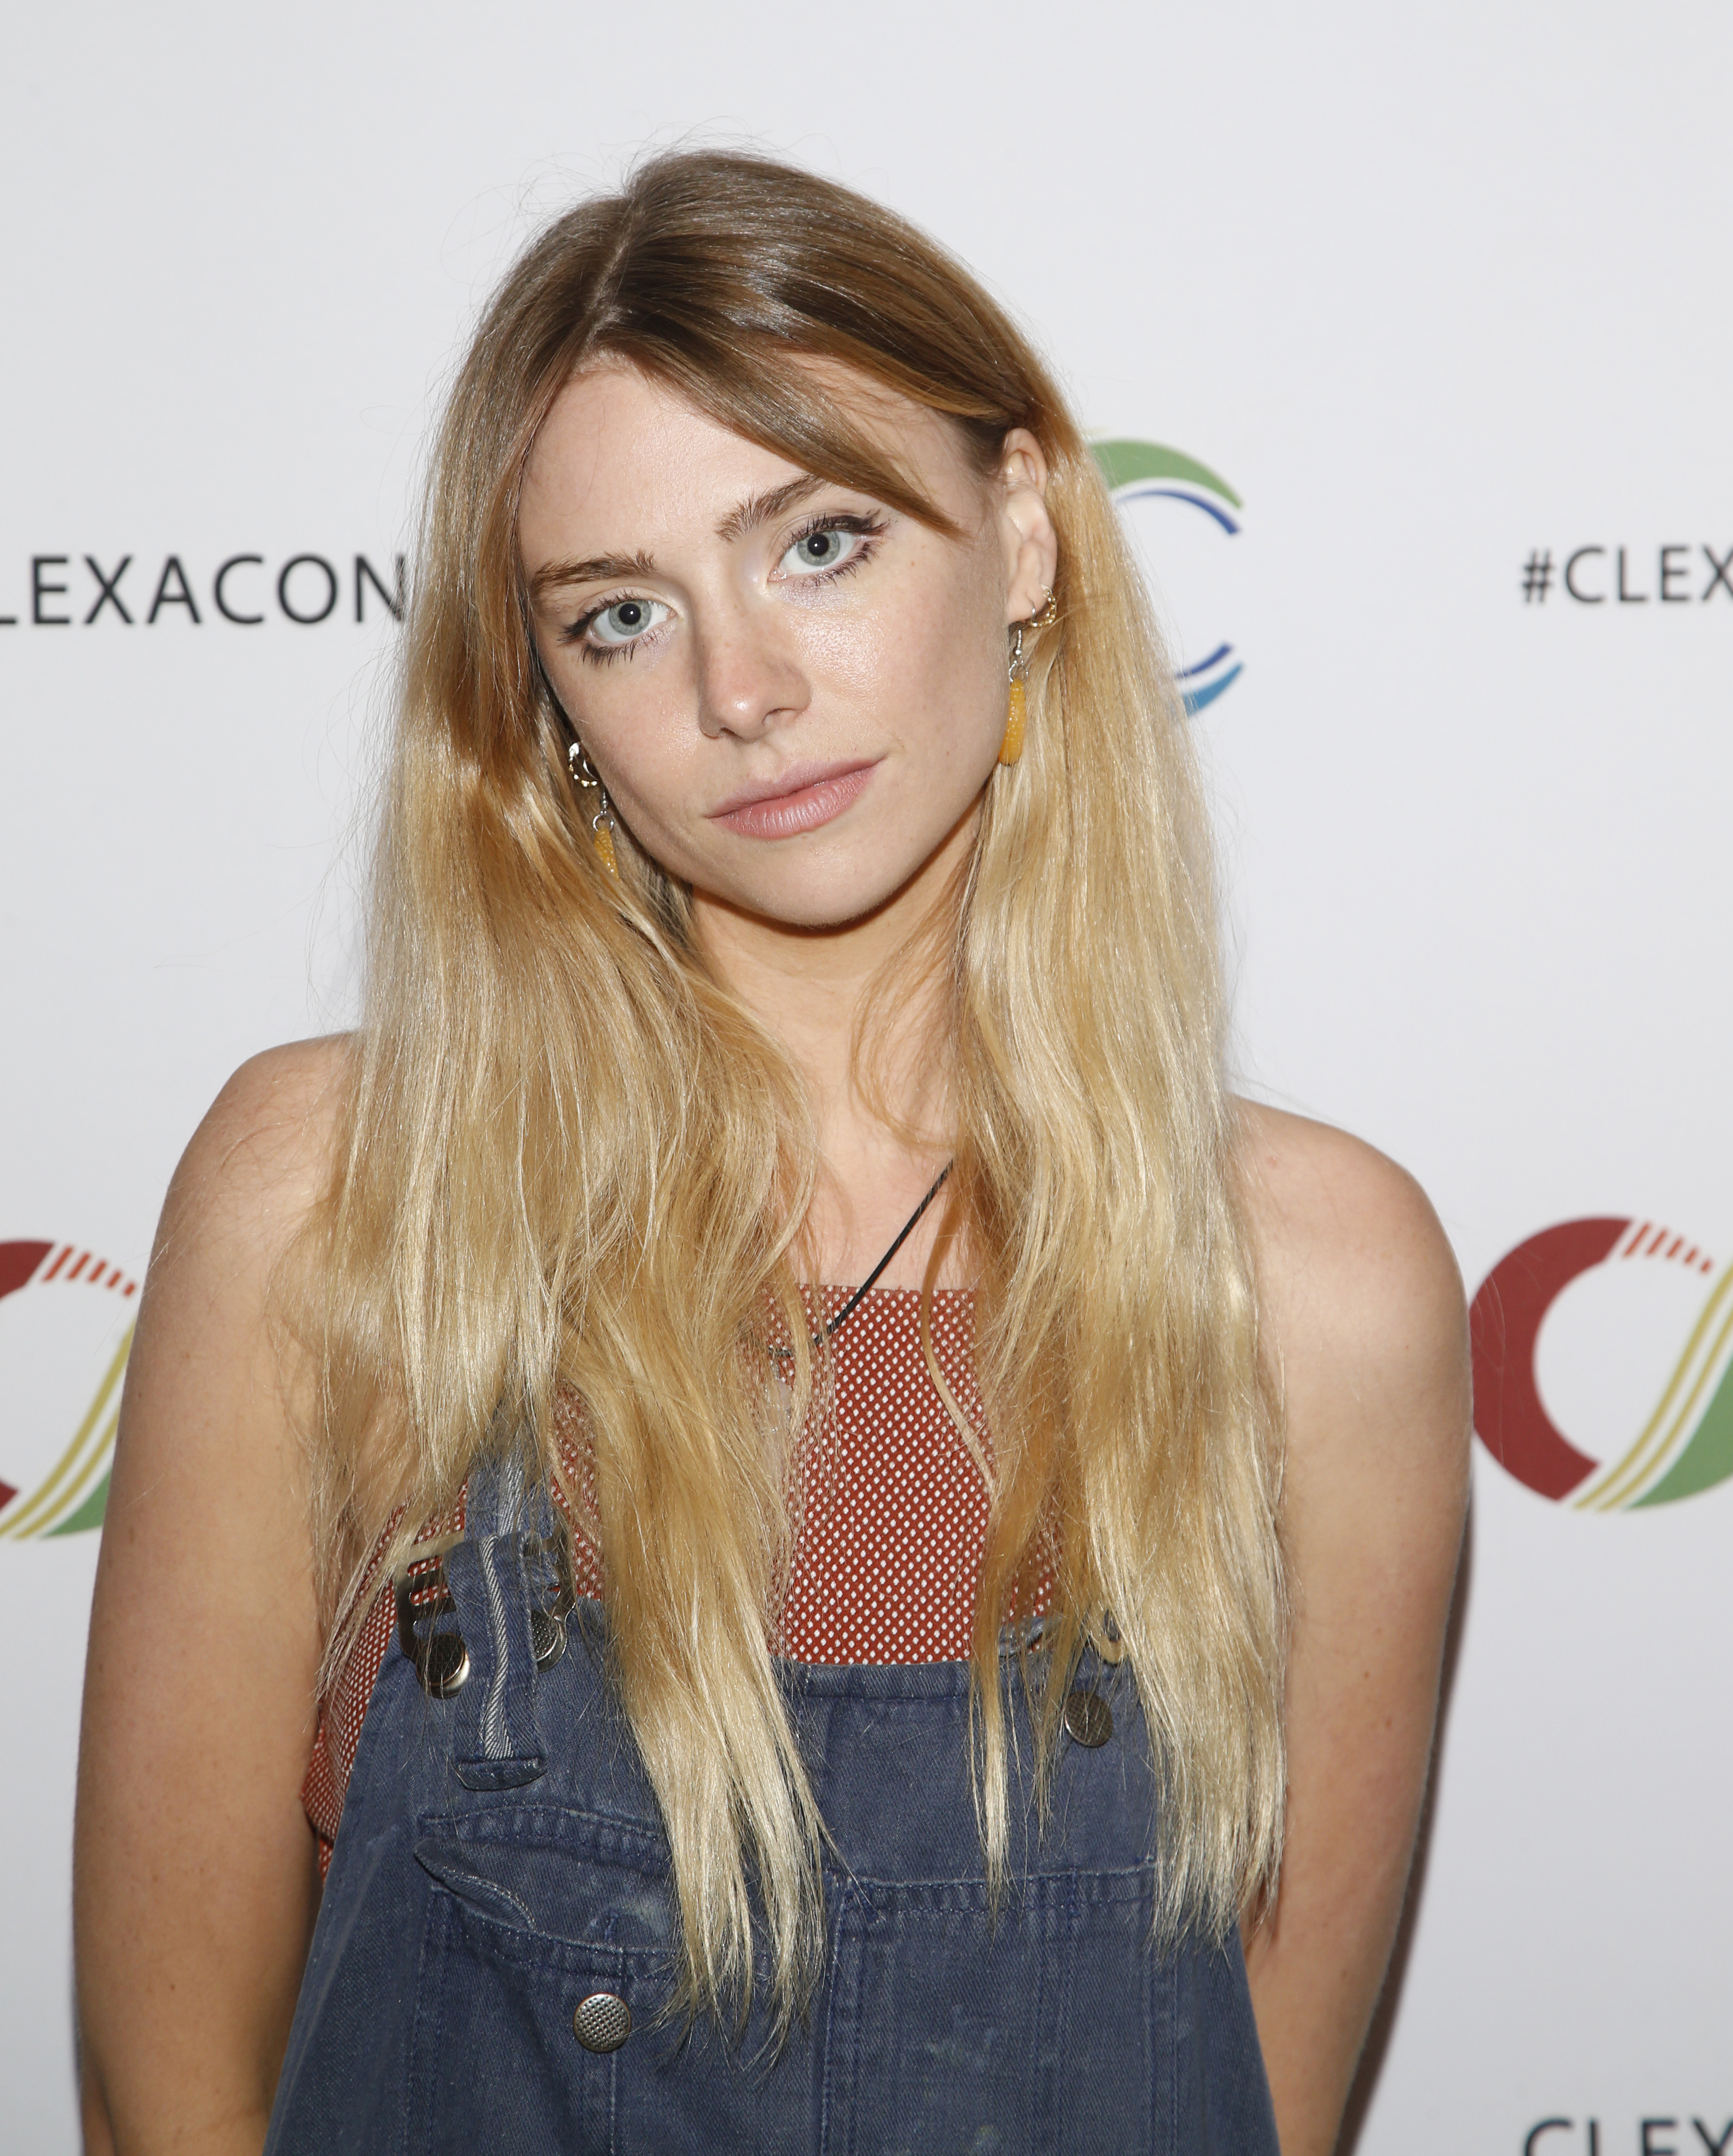 Maddie Phillips attends the ClexaCon 2021 convention at the Tropicana Las Vegas on October 08, 2021, in Las Vegas, Nevada. | Source: Getty Images